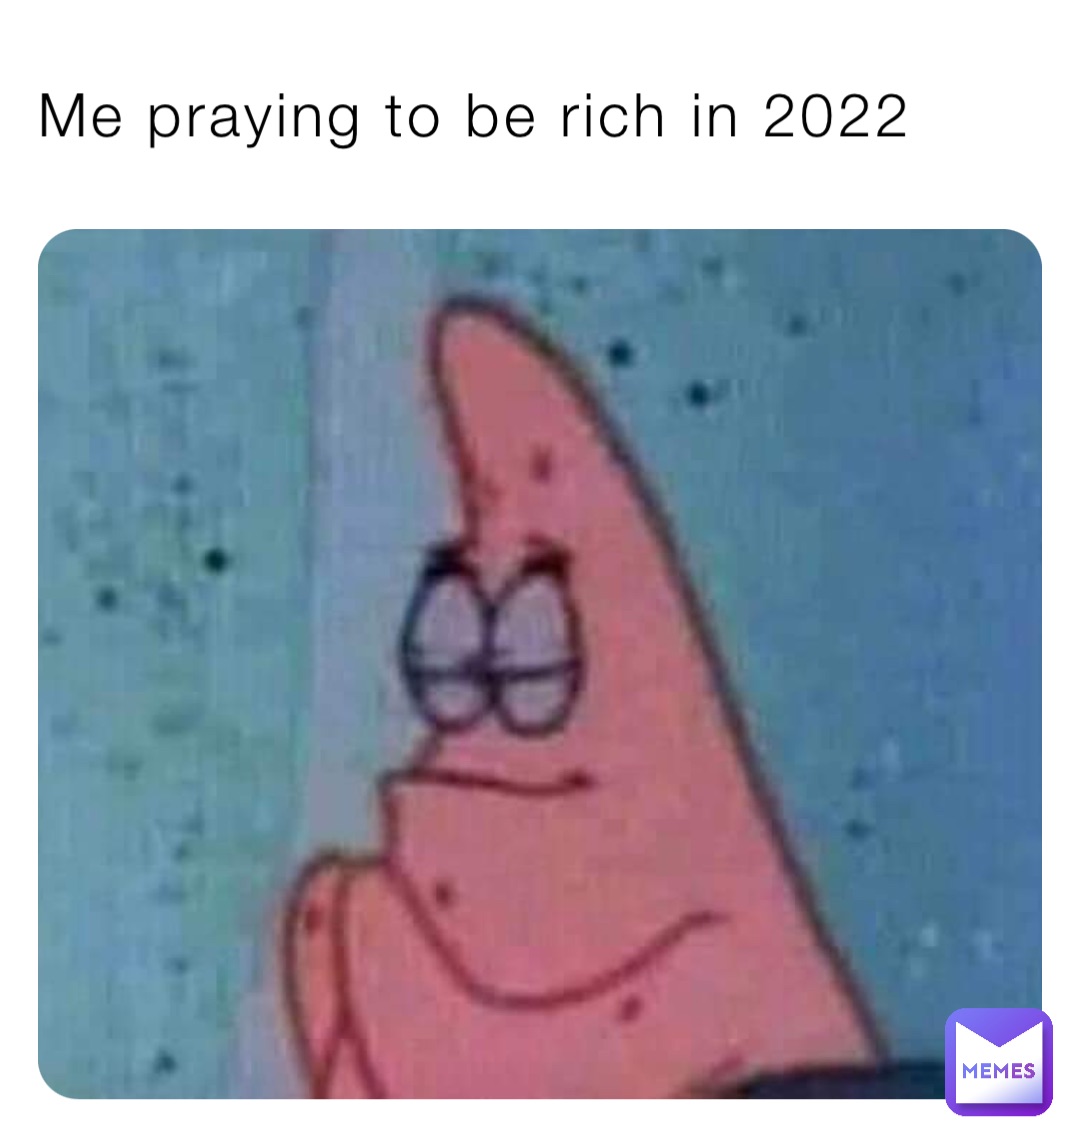 Me praying to be rich in 2022